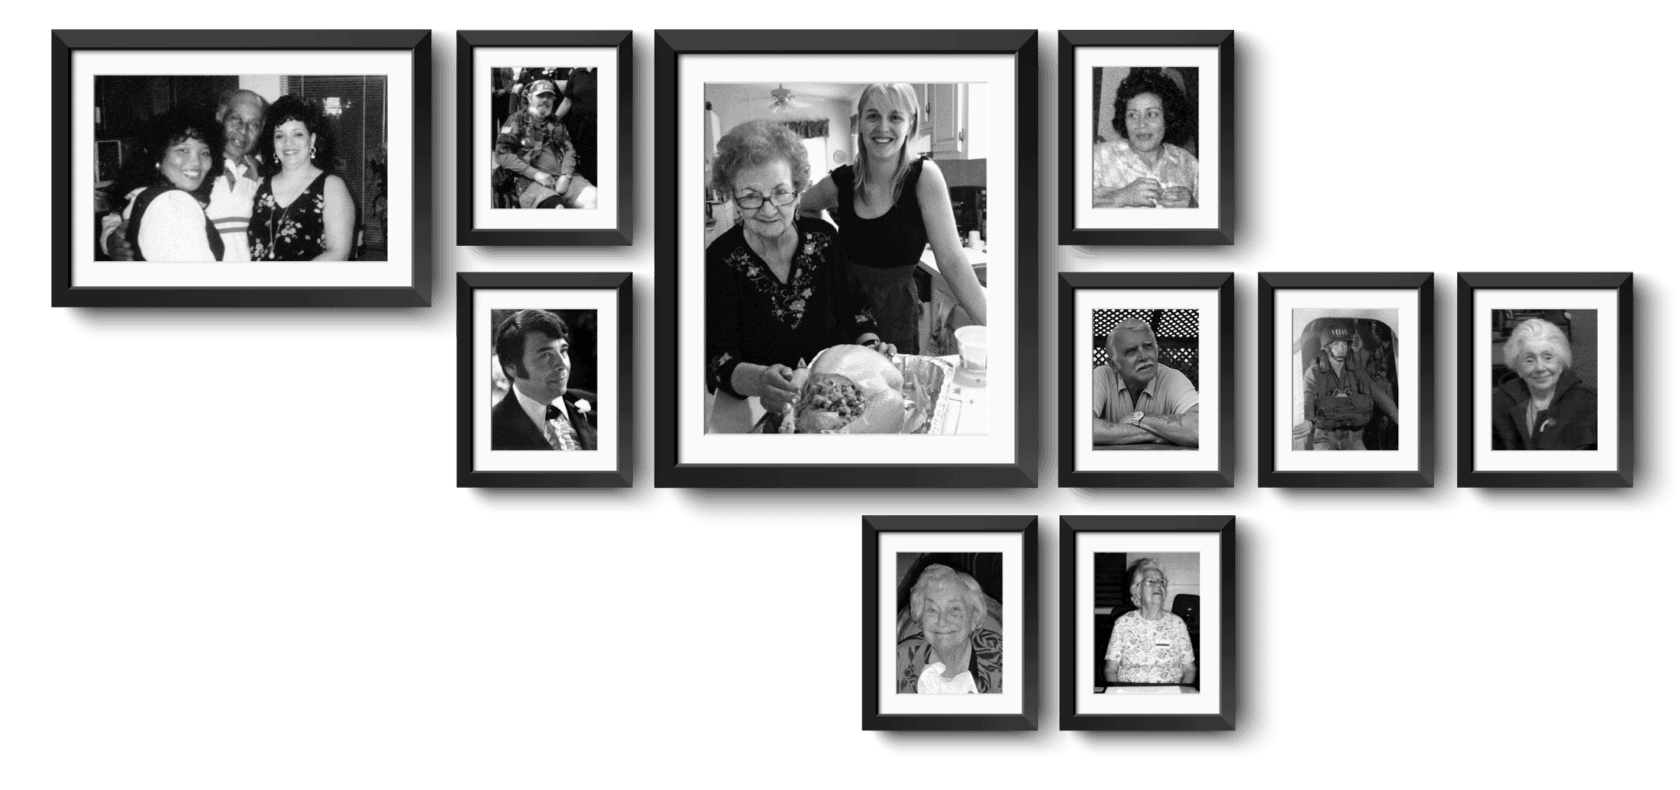 A collage of framed photos of elderly ones and their families